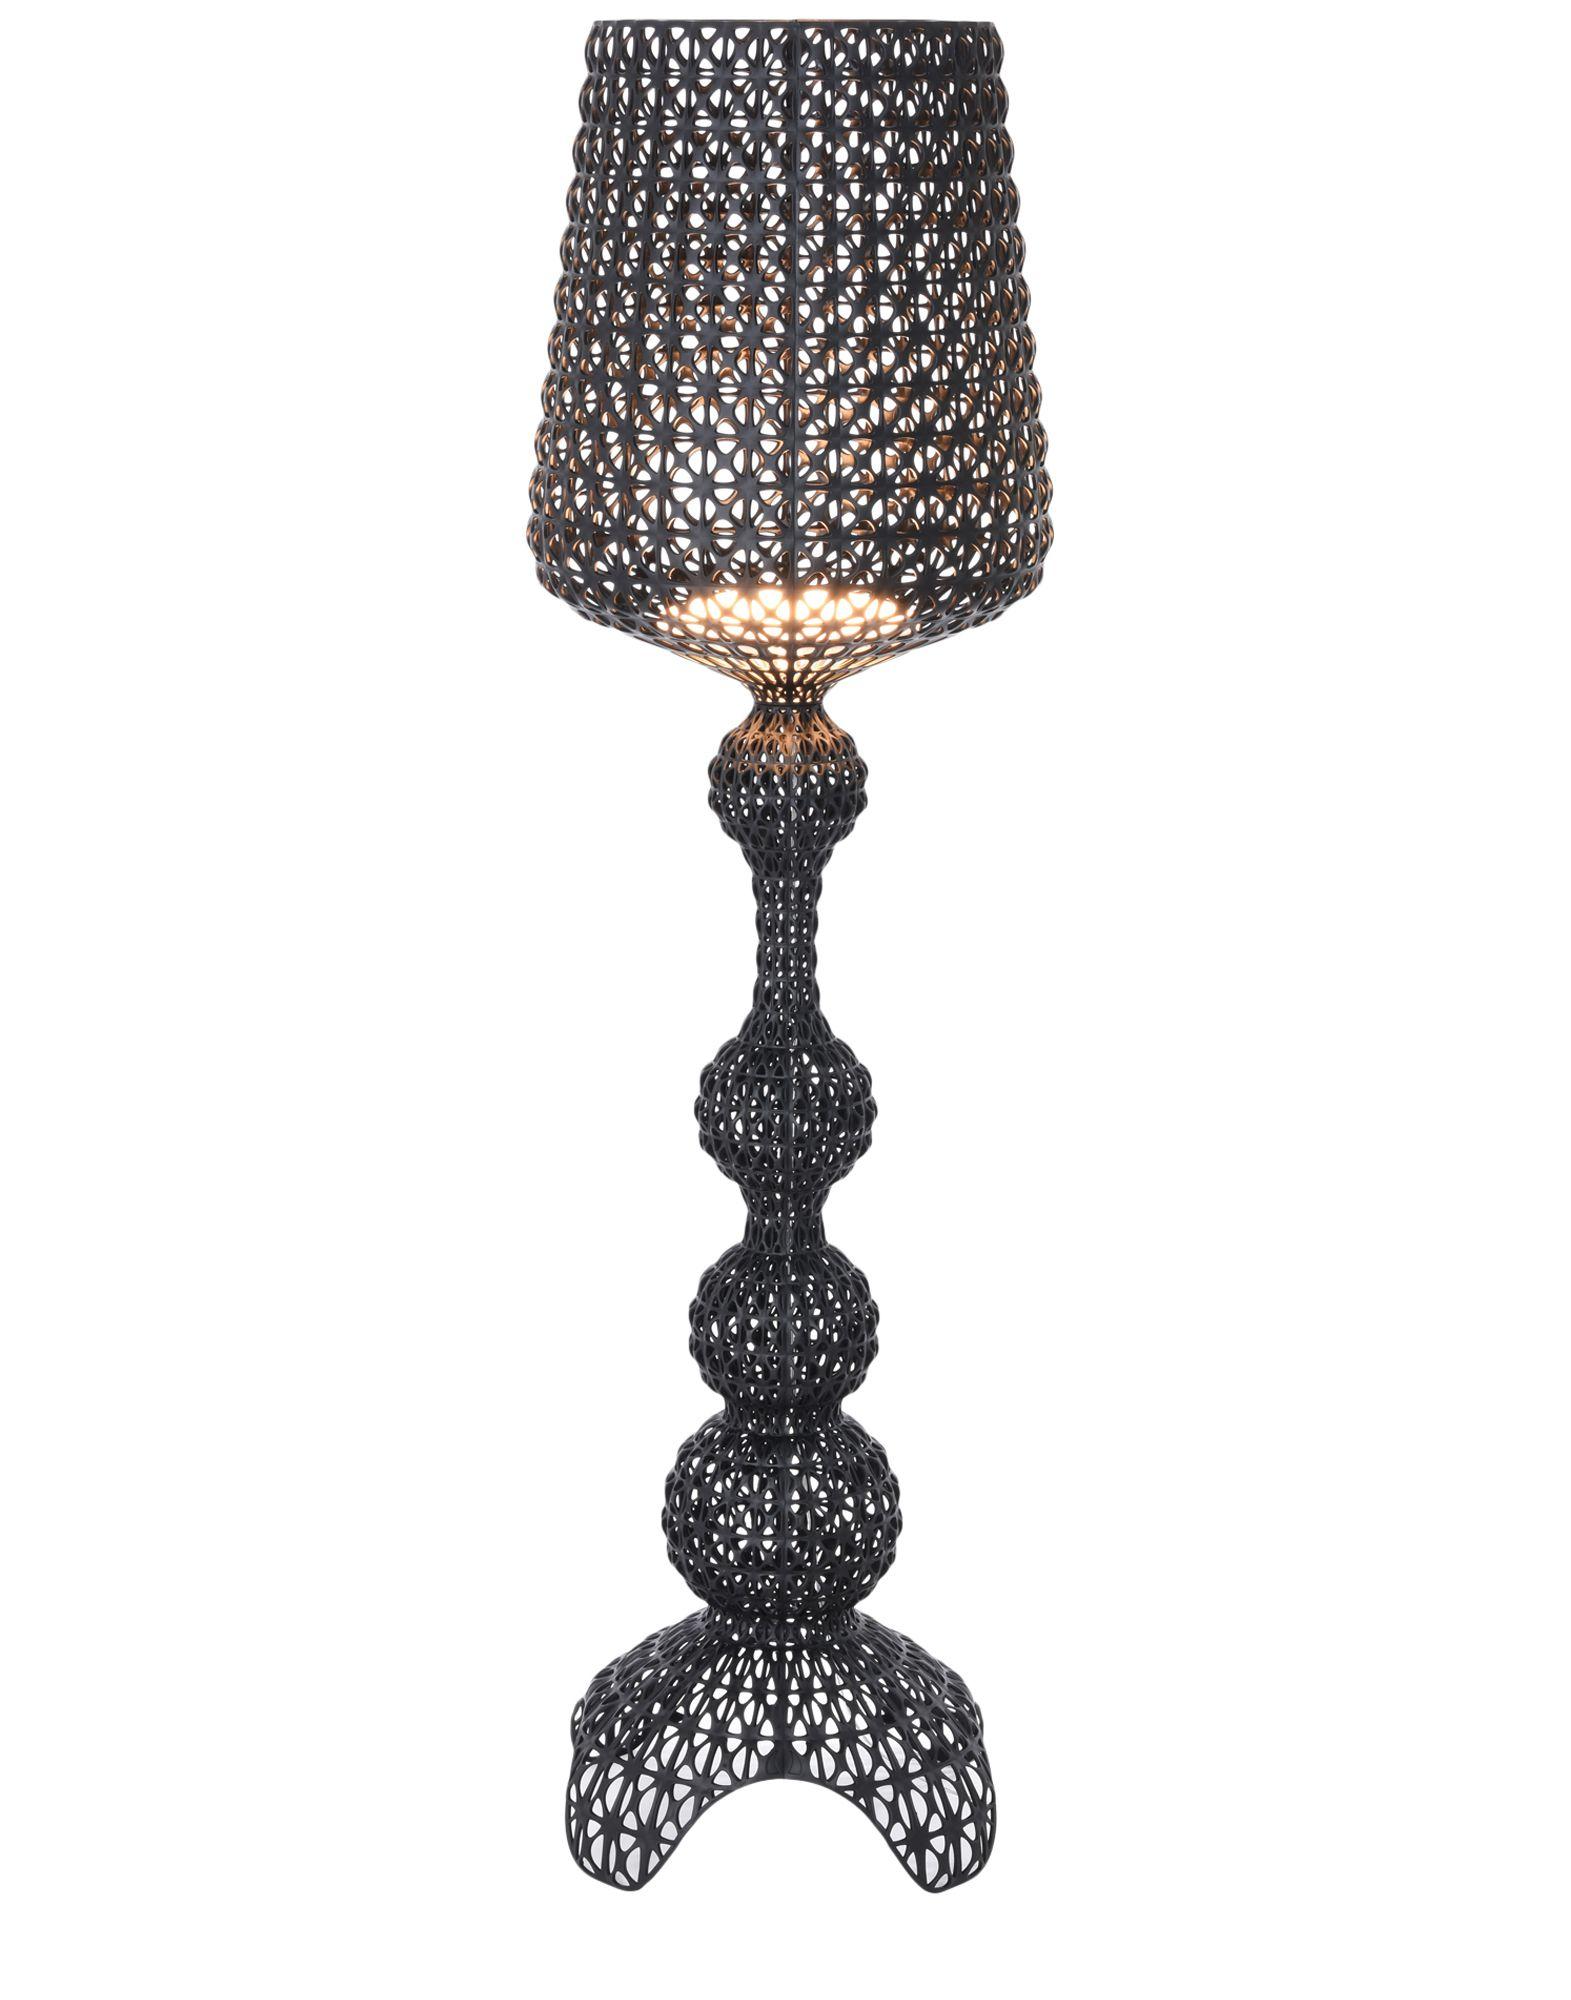 The Kabuki floor lamp is injection molded. The sophisticated injection technology used makes it possible to create a woven structure similar to lace with a unique perforated surface through which the light is diffused.

Dimensions: Height 65.33